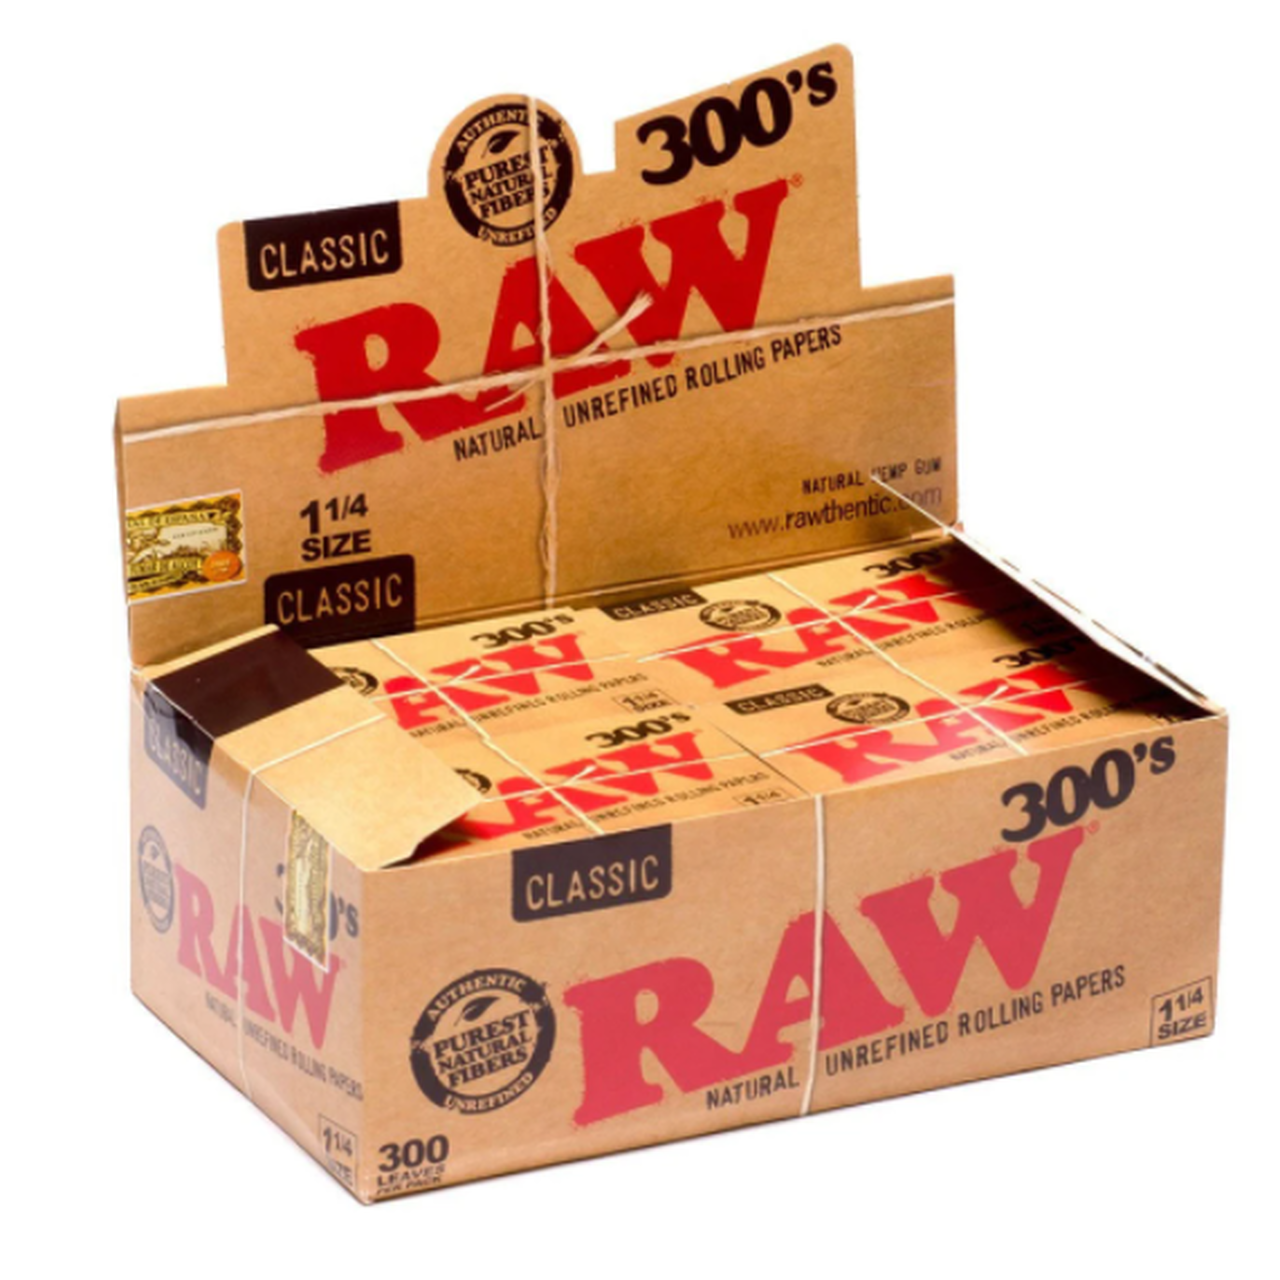 RAW ORGANIC  300's 1 1/4 SIZE CLASSIC ROLLING PAPERS 20CT